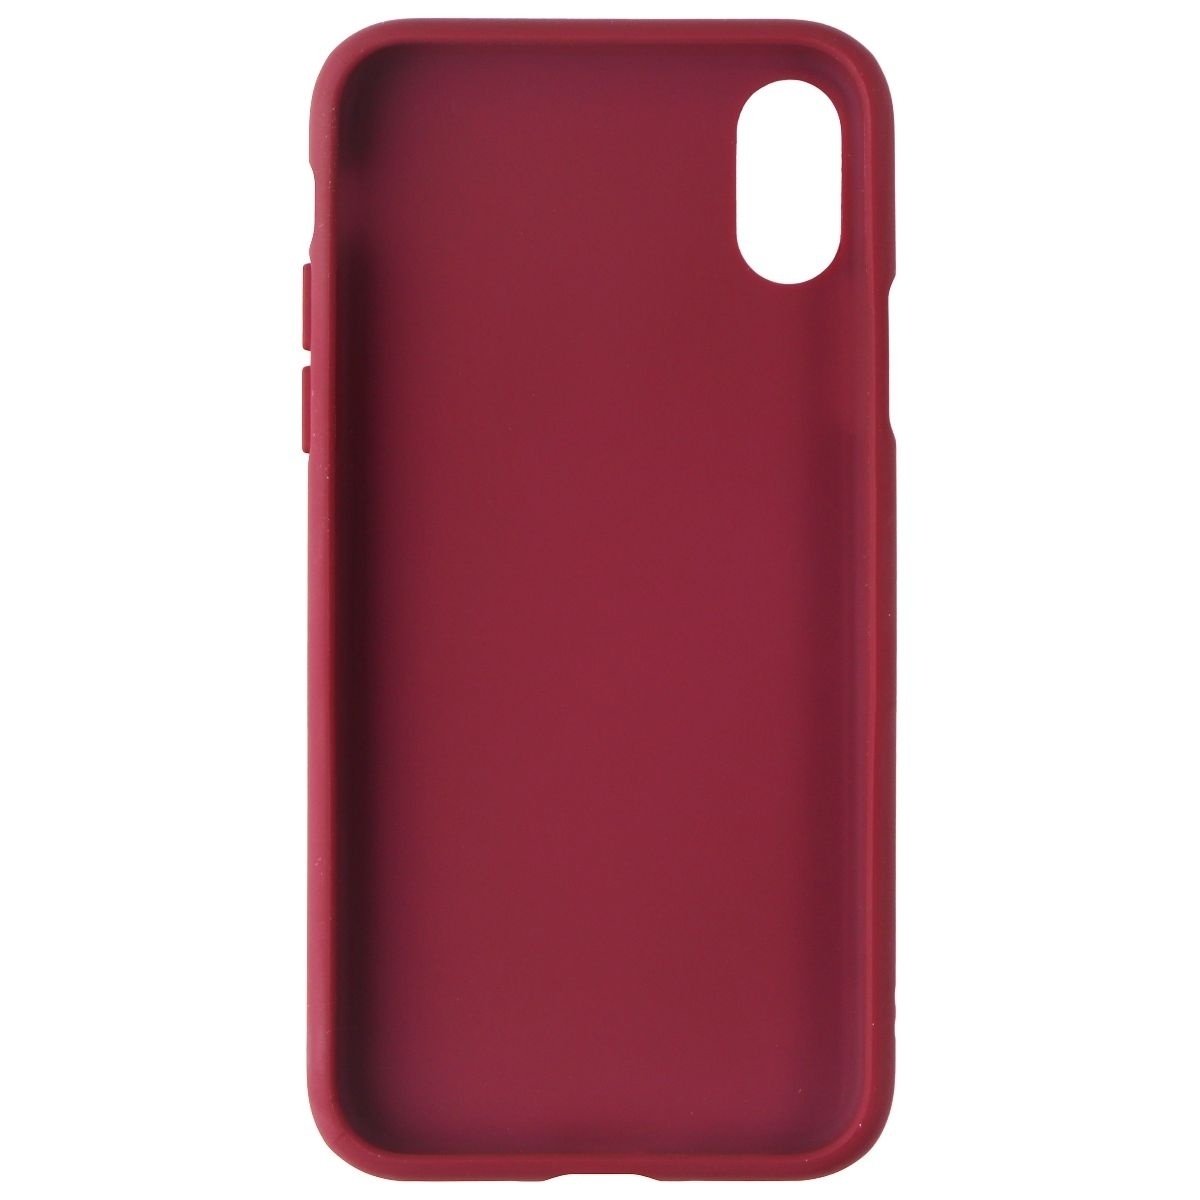 Adidas 3-Stripes Snap Case For Apple IPhone Xs/X - Maroon Red